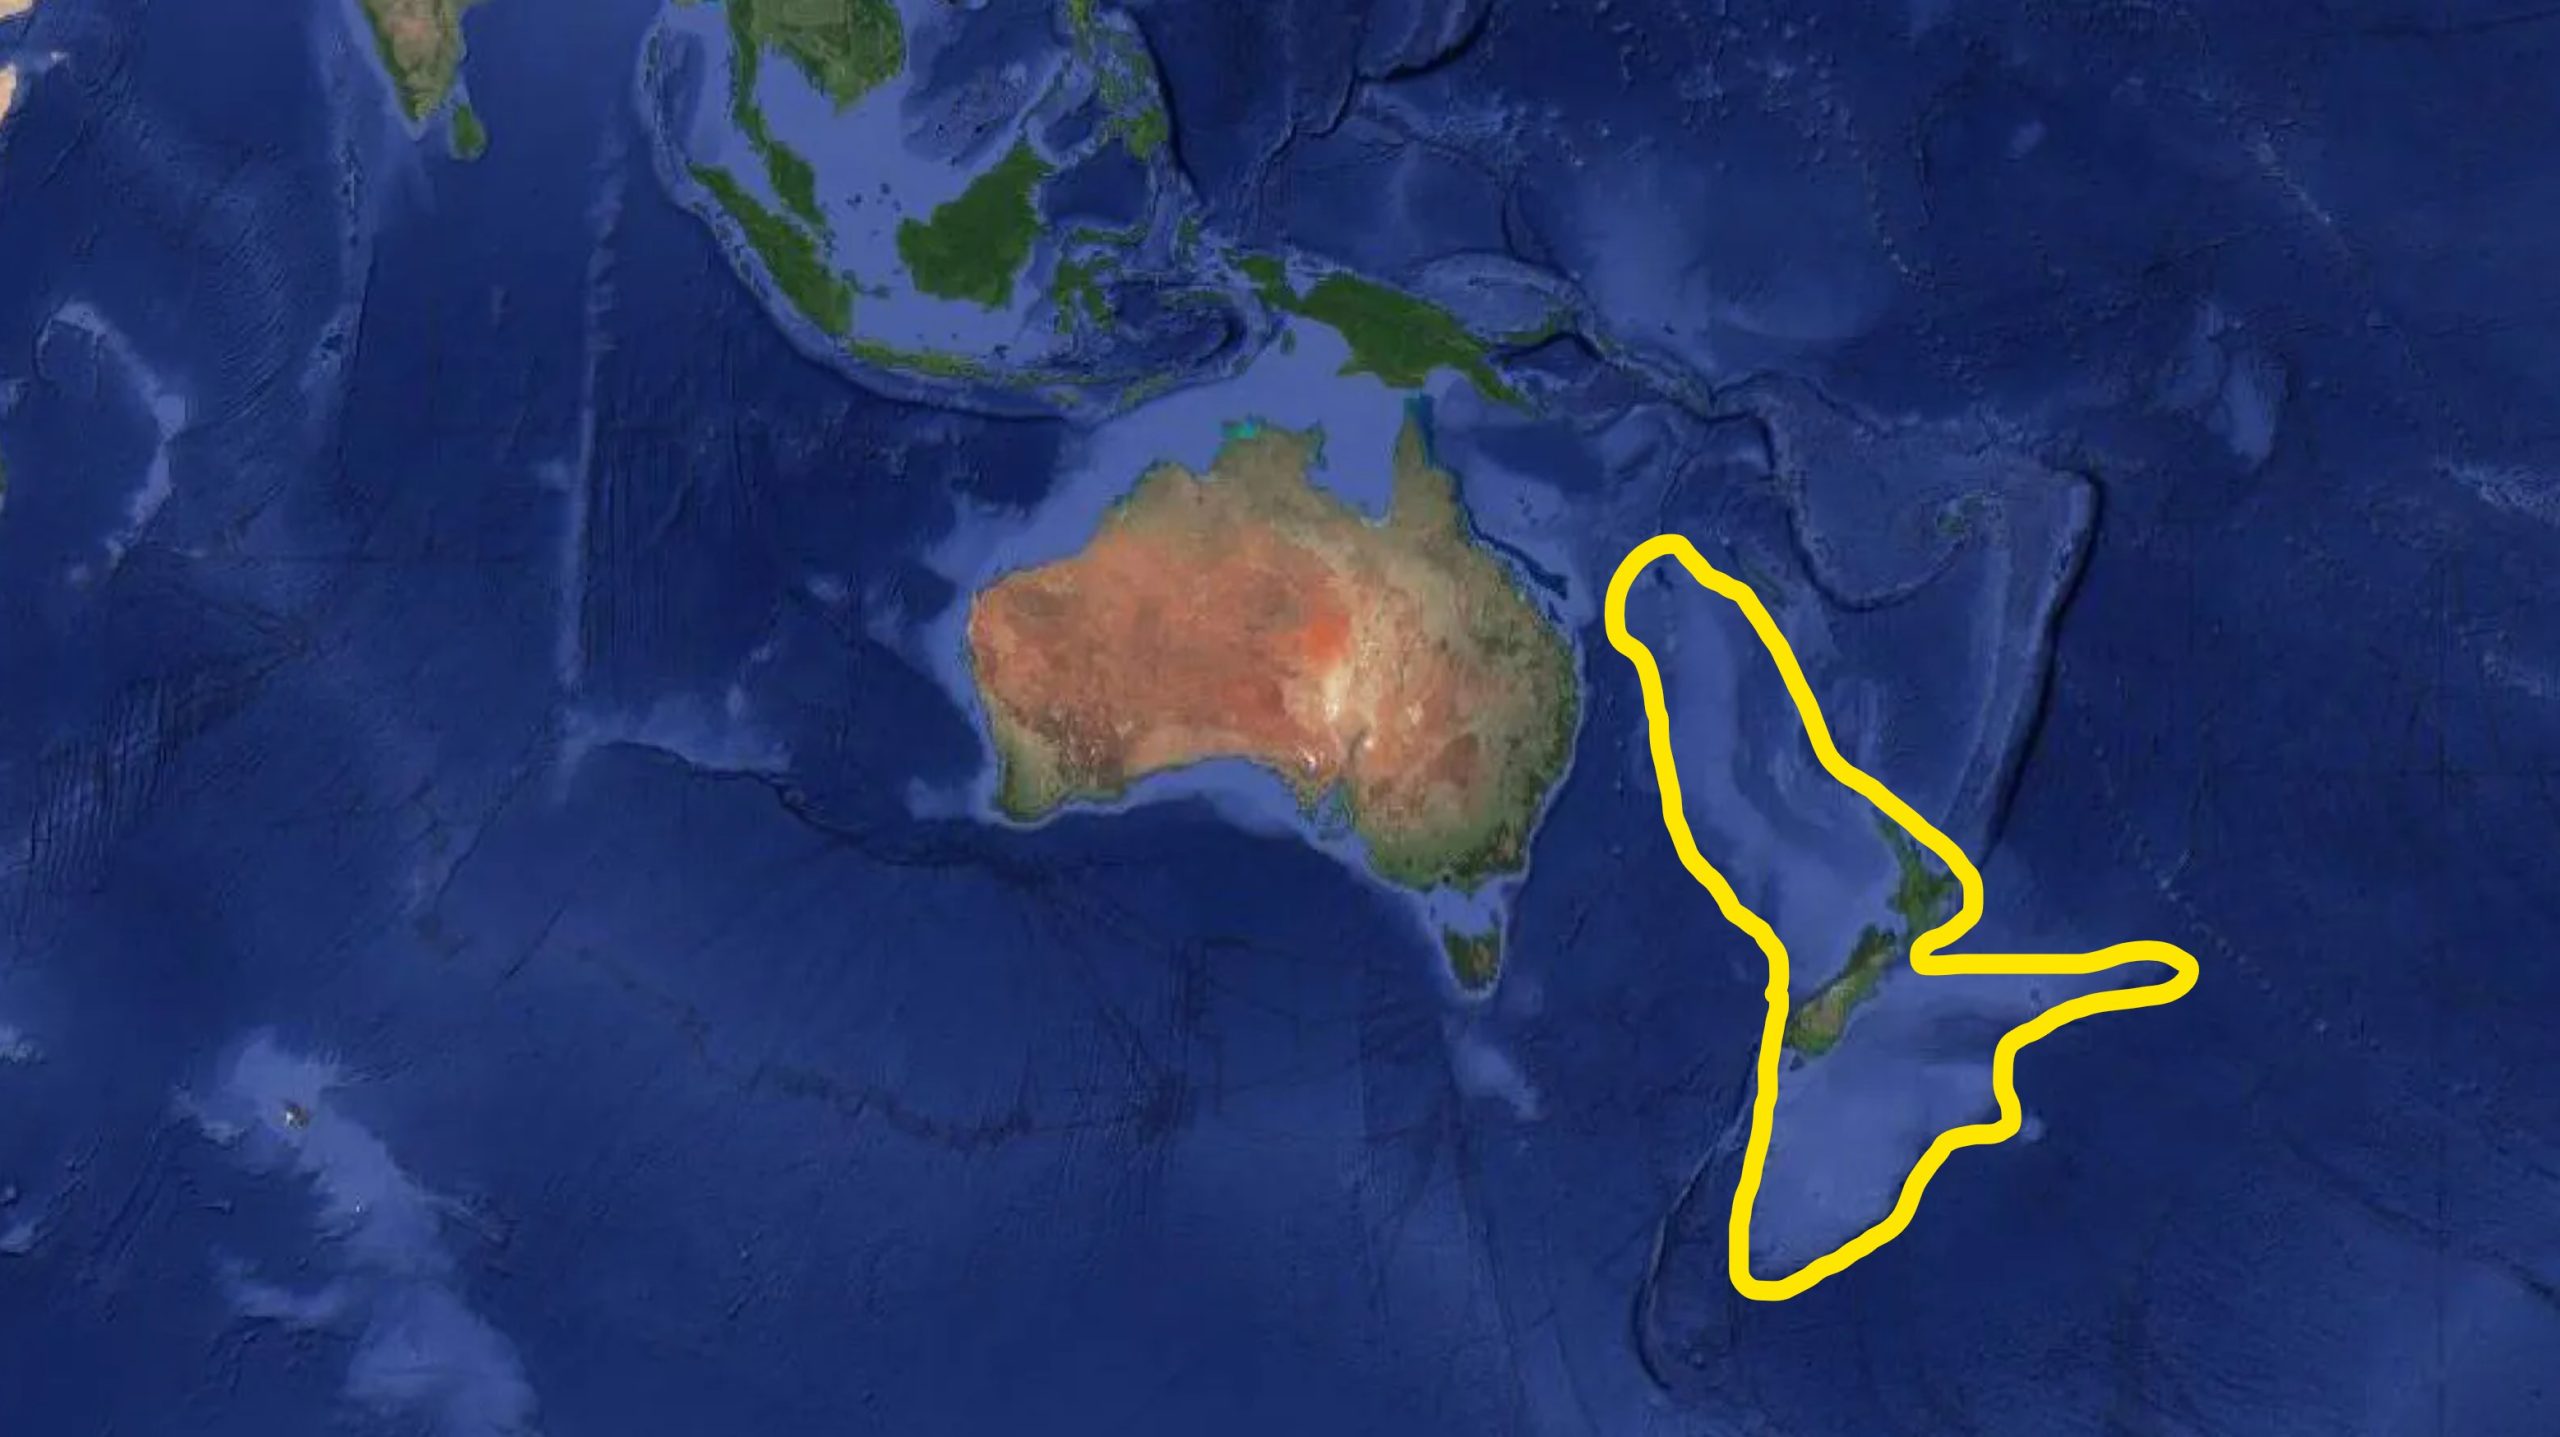 Worldly | Zealandia is the 8th continent of this world. Here's the proof.